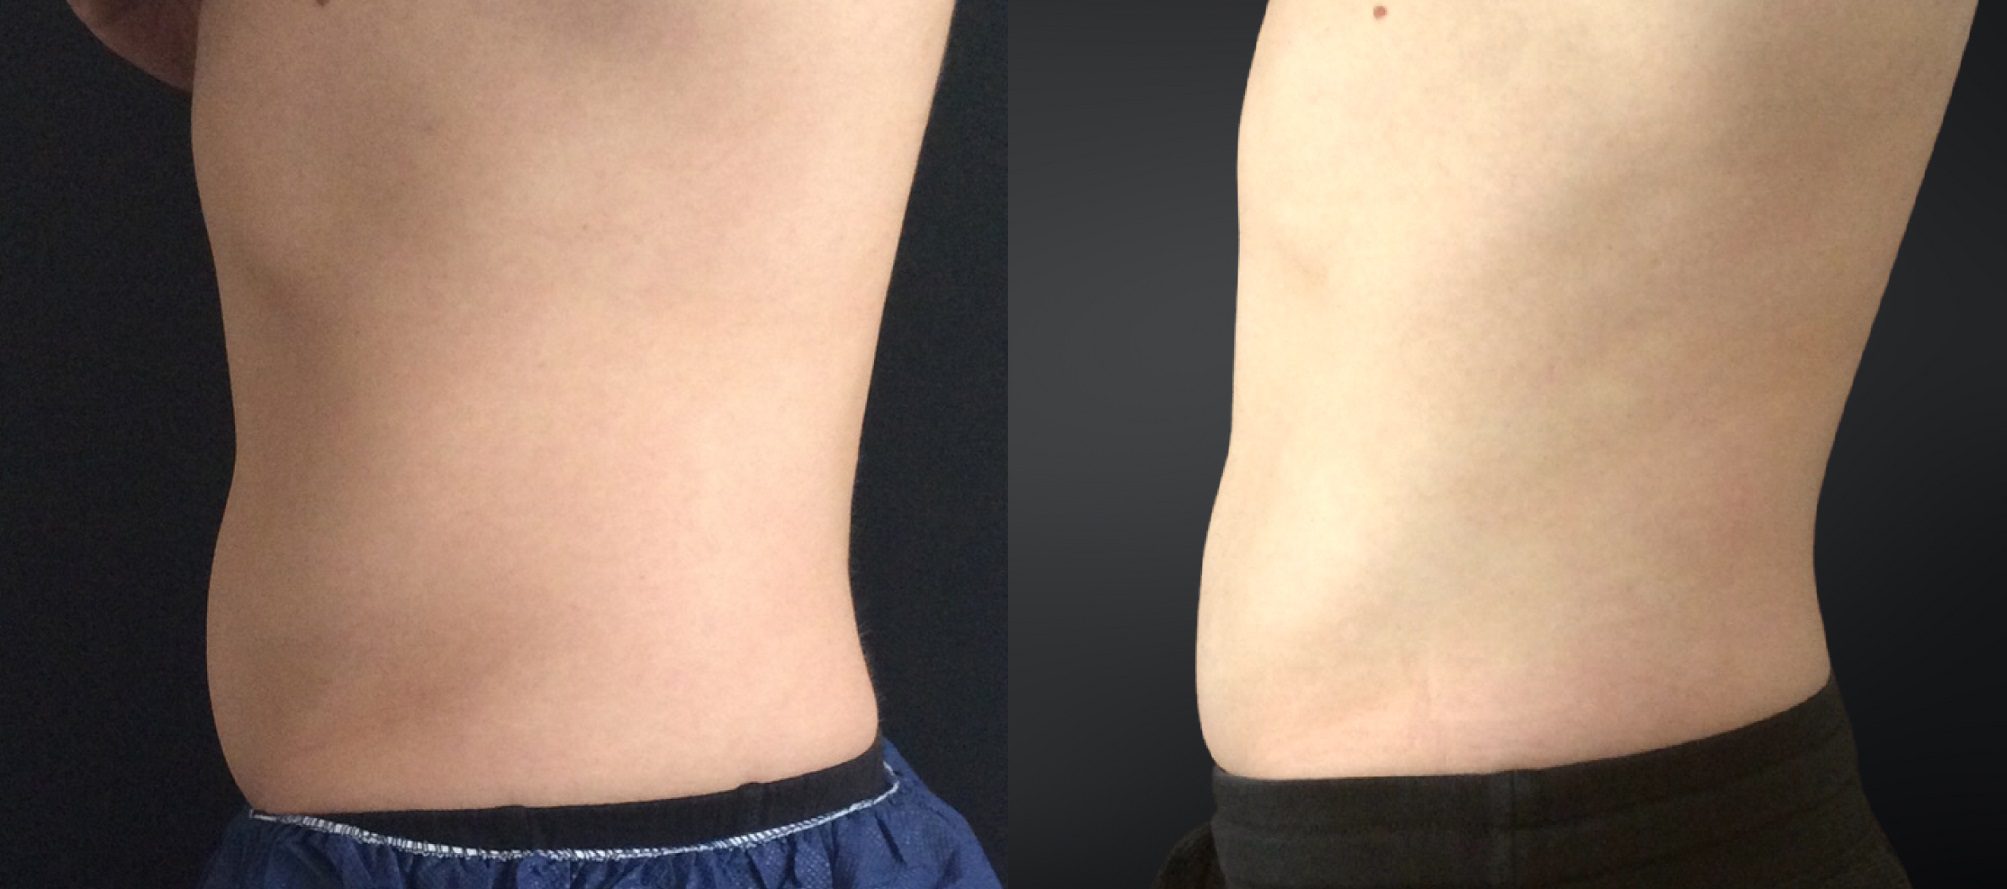 coolsculpting before and after tummy